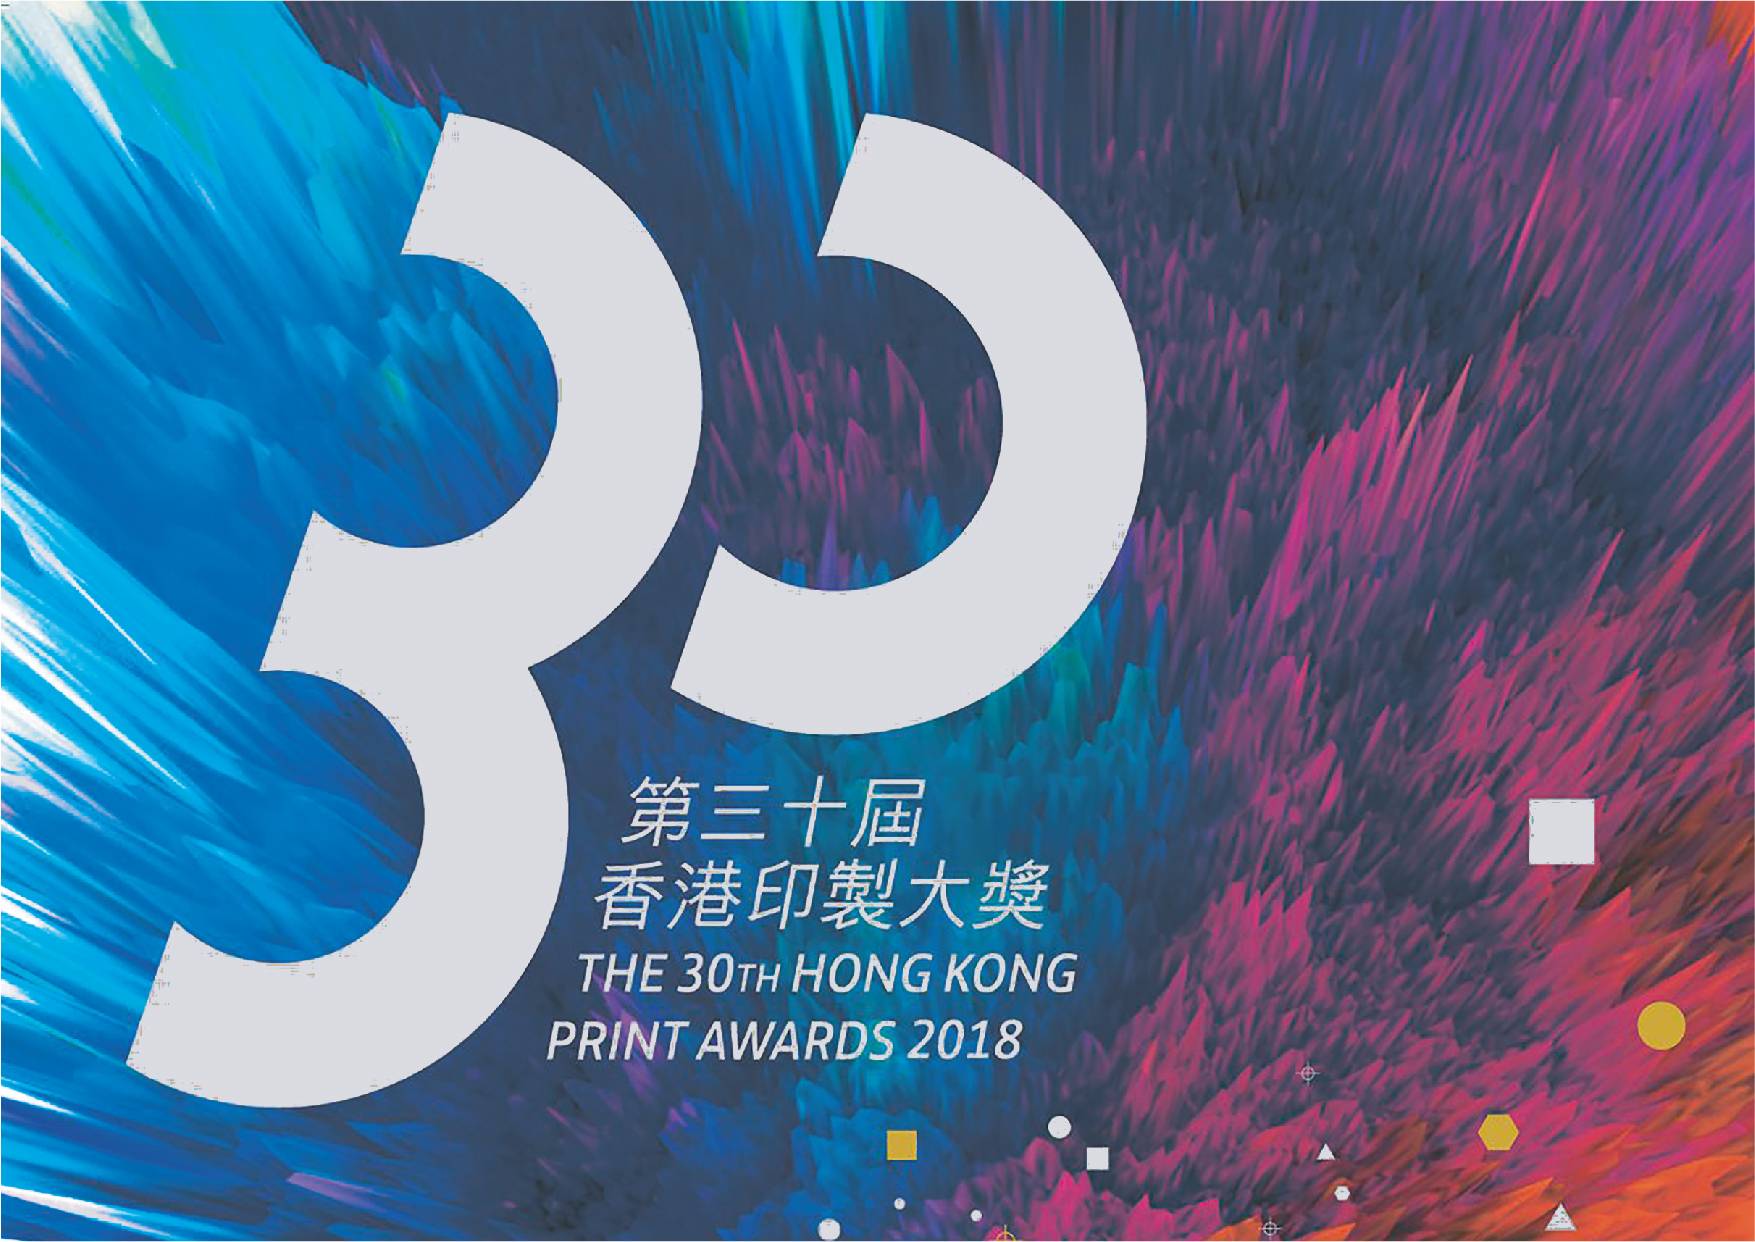 3M posters for new paper product launch concept for THE 30TH Hong Kong Print Awards 2018